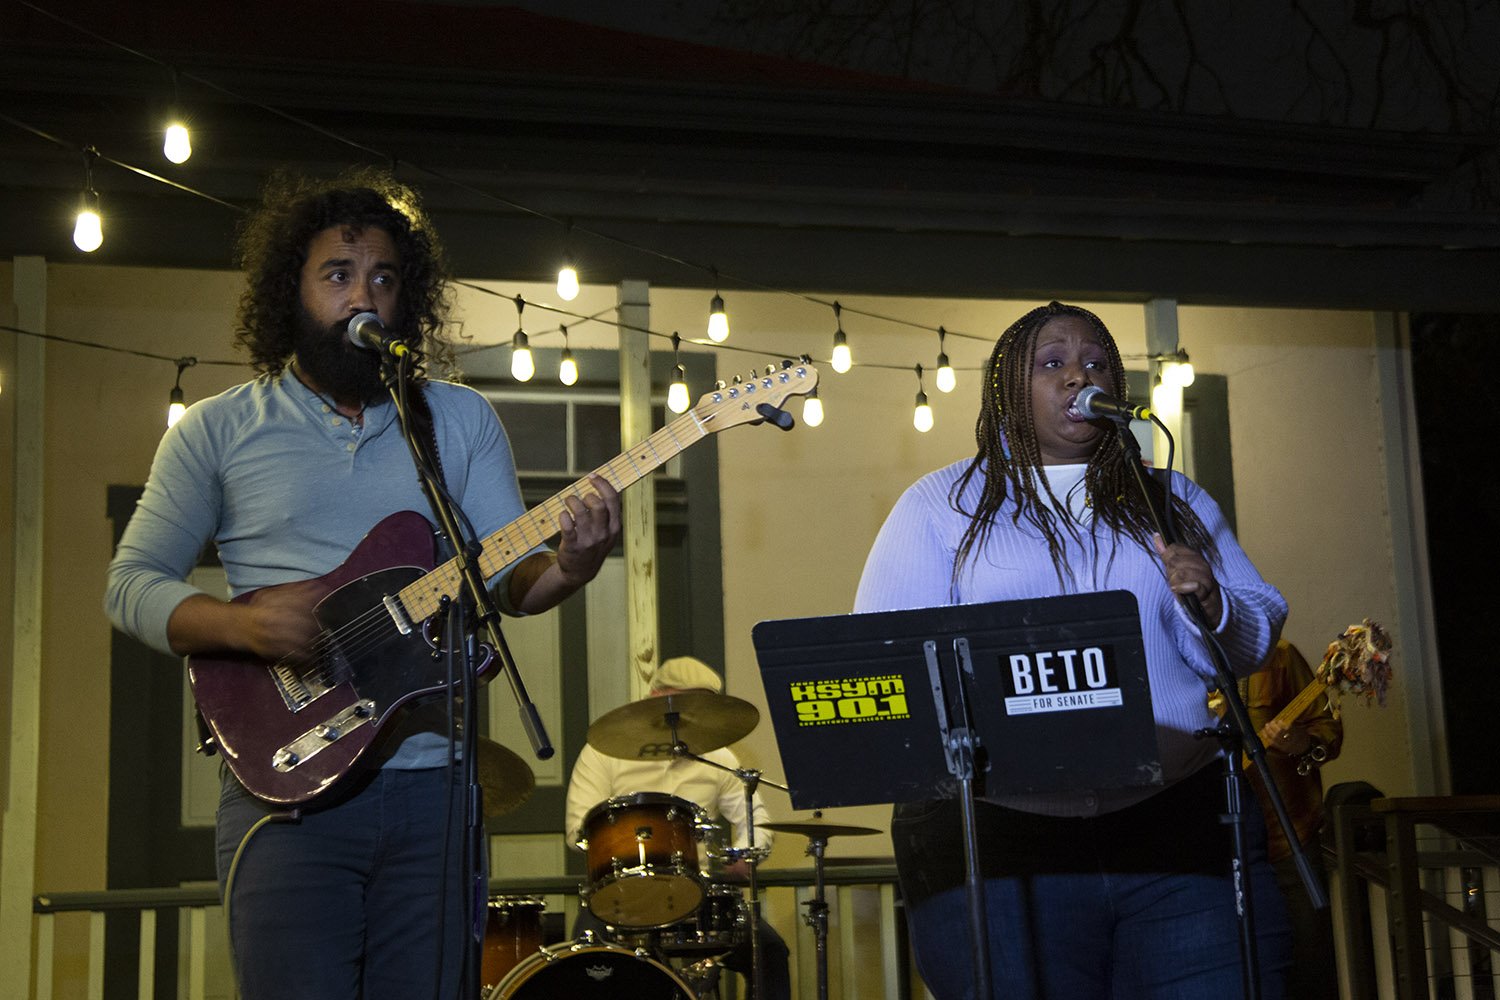 Jed Craddock (left) and Andrea "Vocab" Sanderson perform during a concert benefiting Ukrainian San Antonio, the local nonprofit cultural group that is raising money for medical supplies to send back home, on Thursday, March 10, 2022, at Hemisfair. Photo by Ben Olivo | Heron